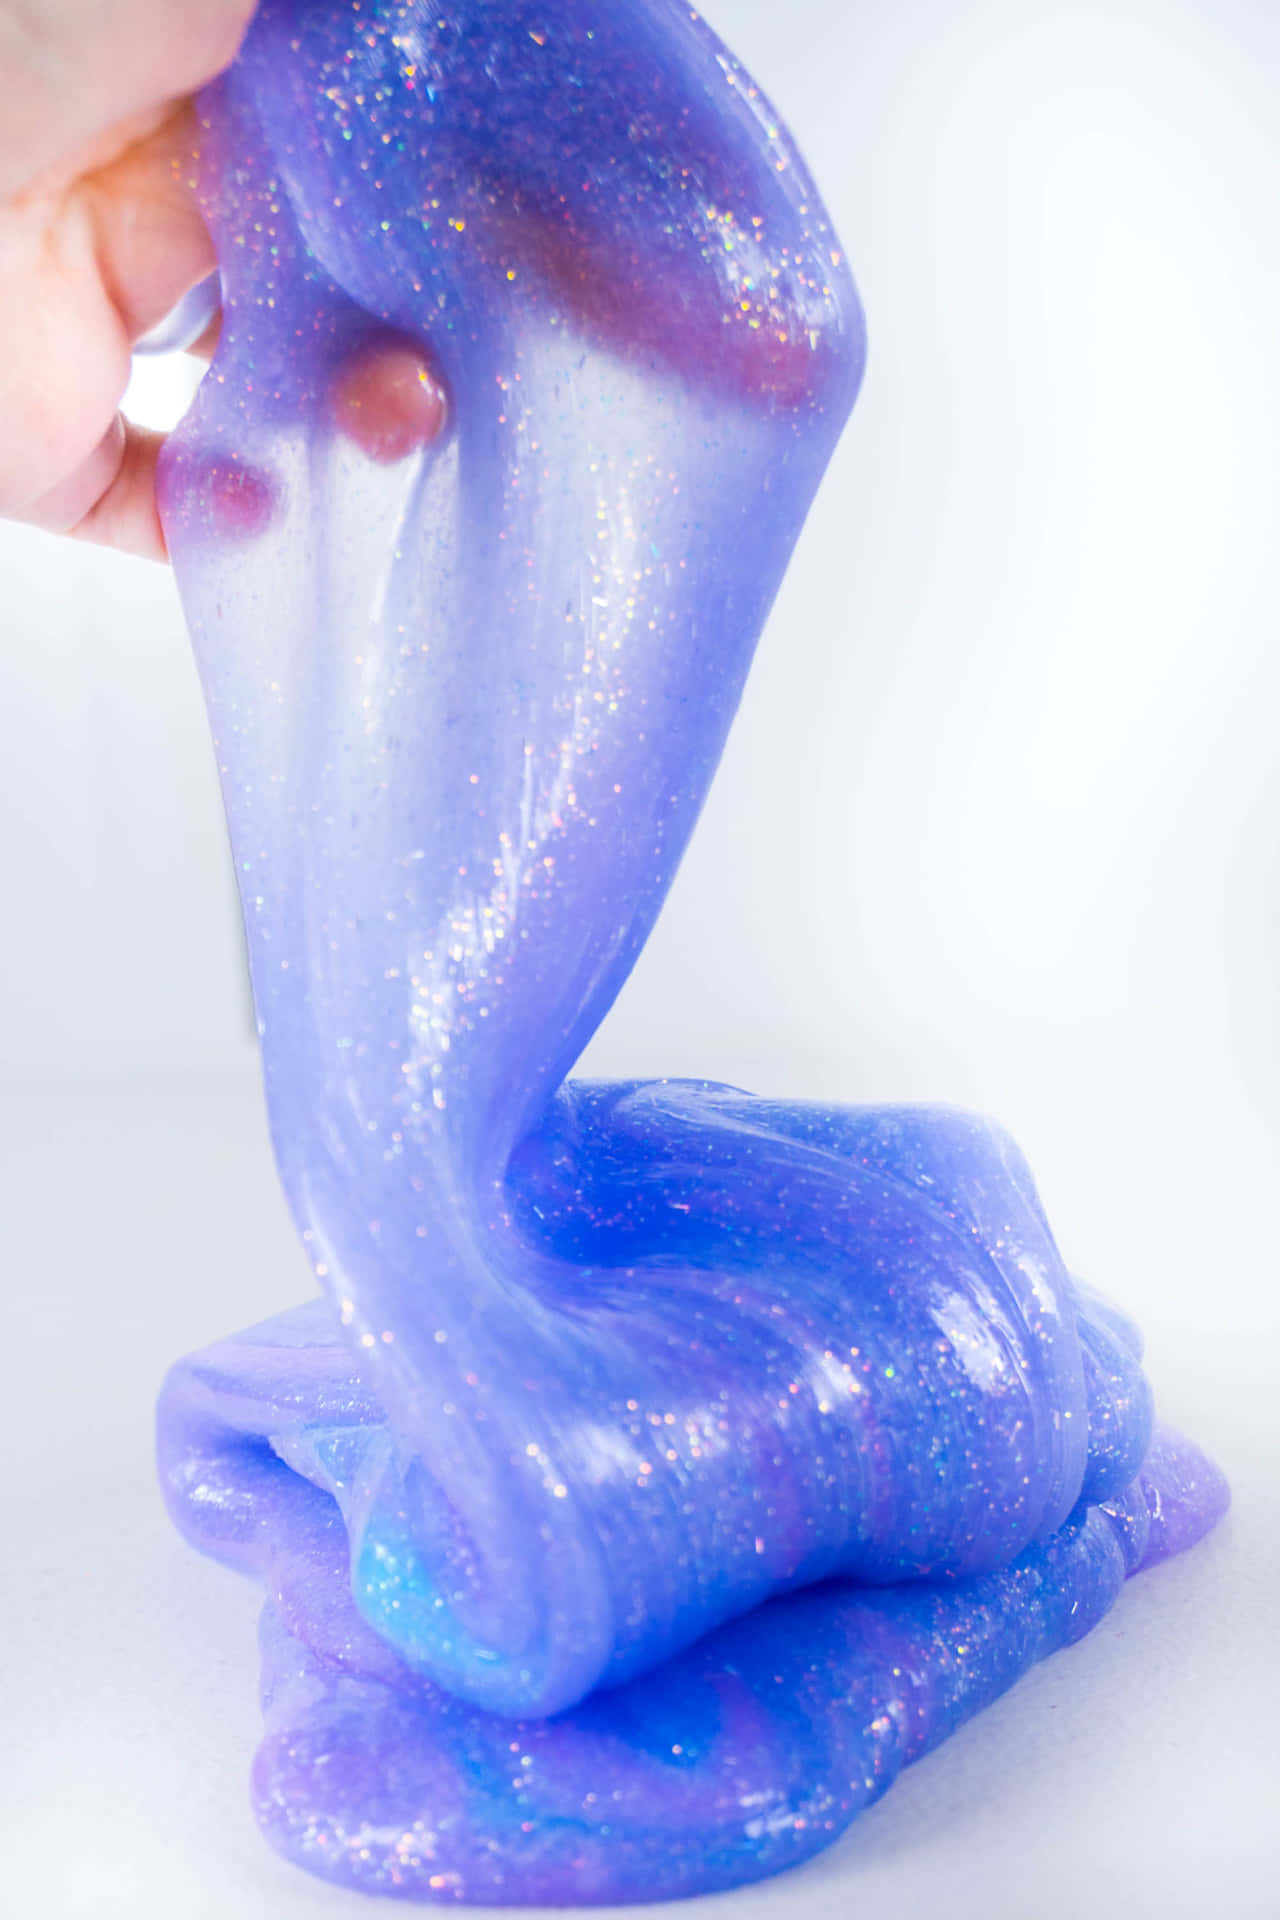 A Burst of Colorful Slime